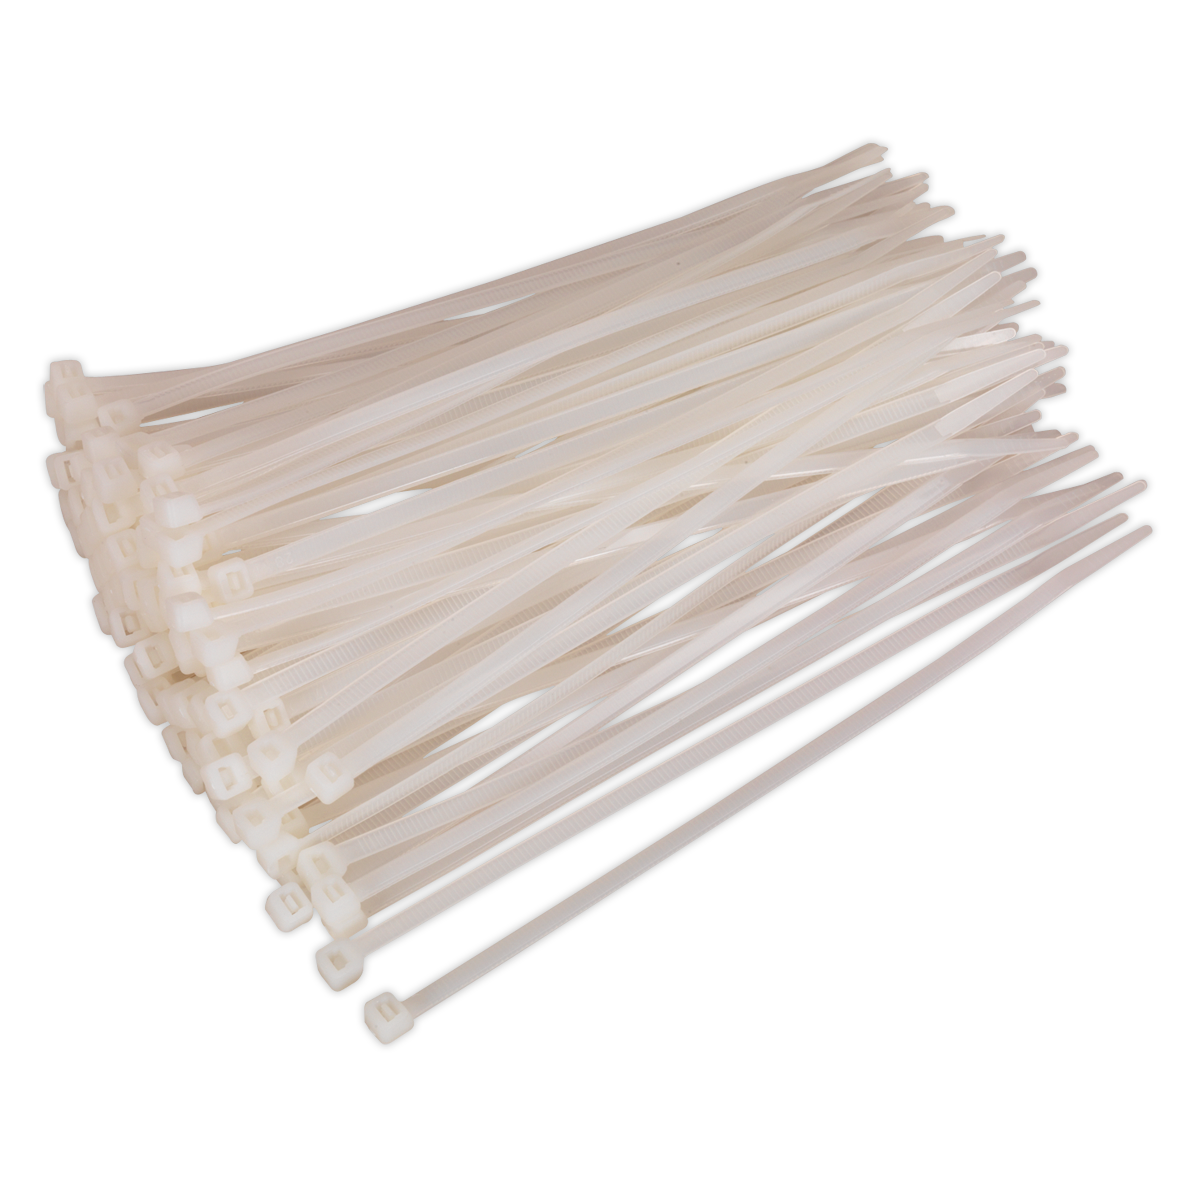 Sealey Cable Tie 200 x 4.8mm White Pack of 100